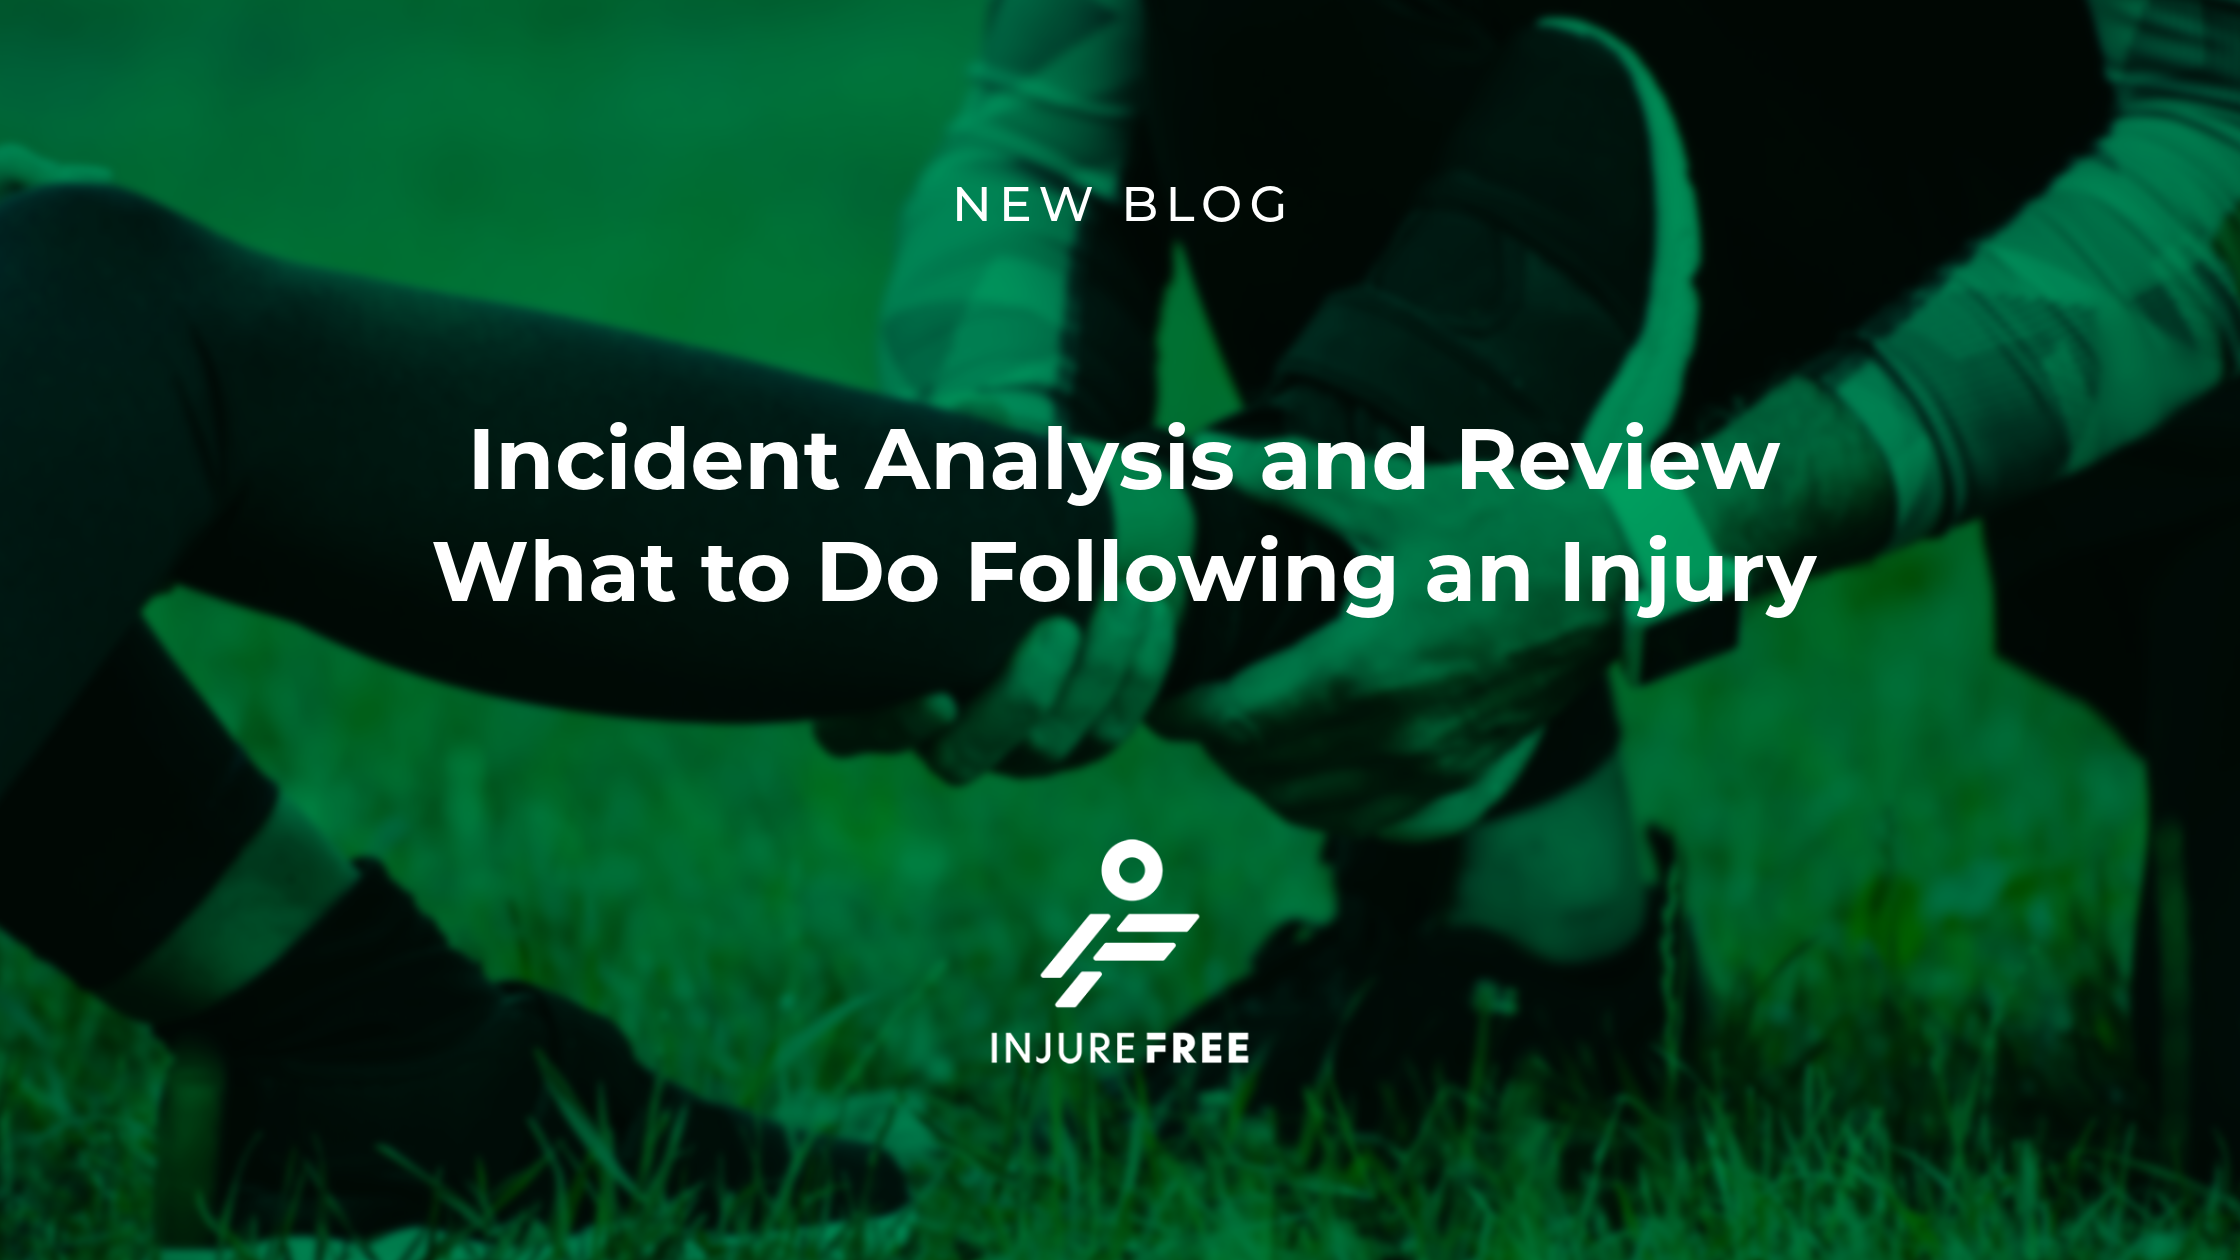 Incident Analysis and Review - What to Do Following an Injury